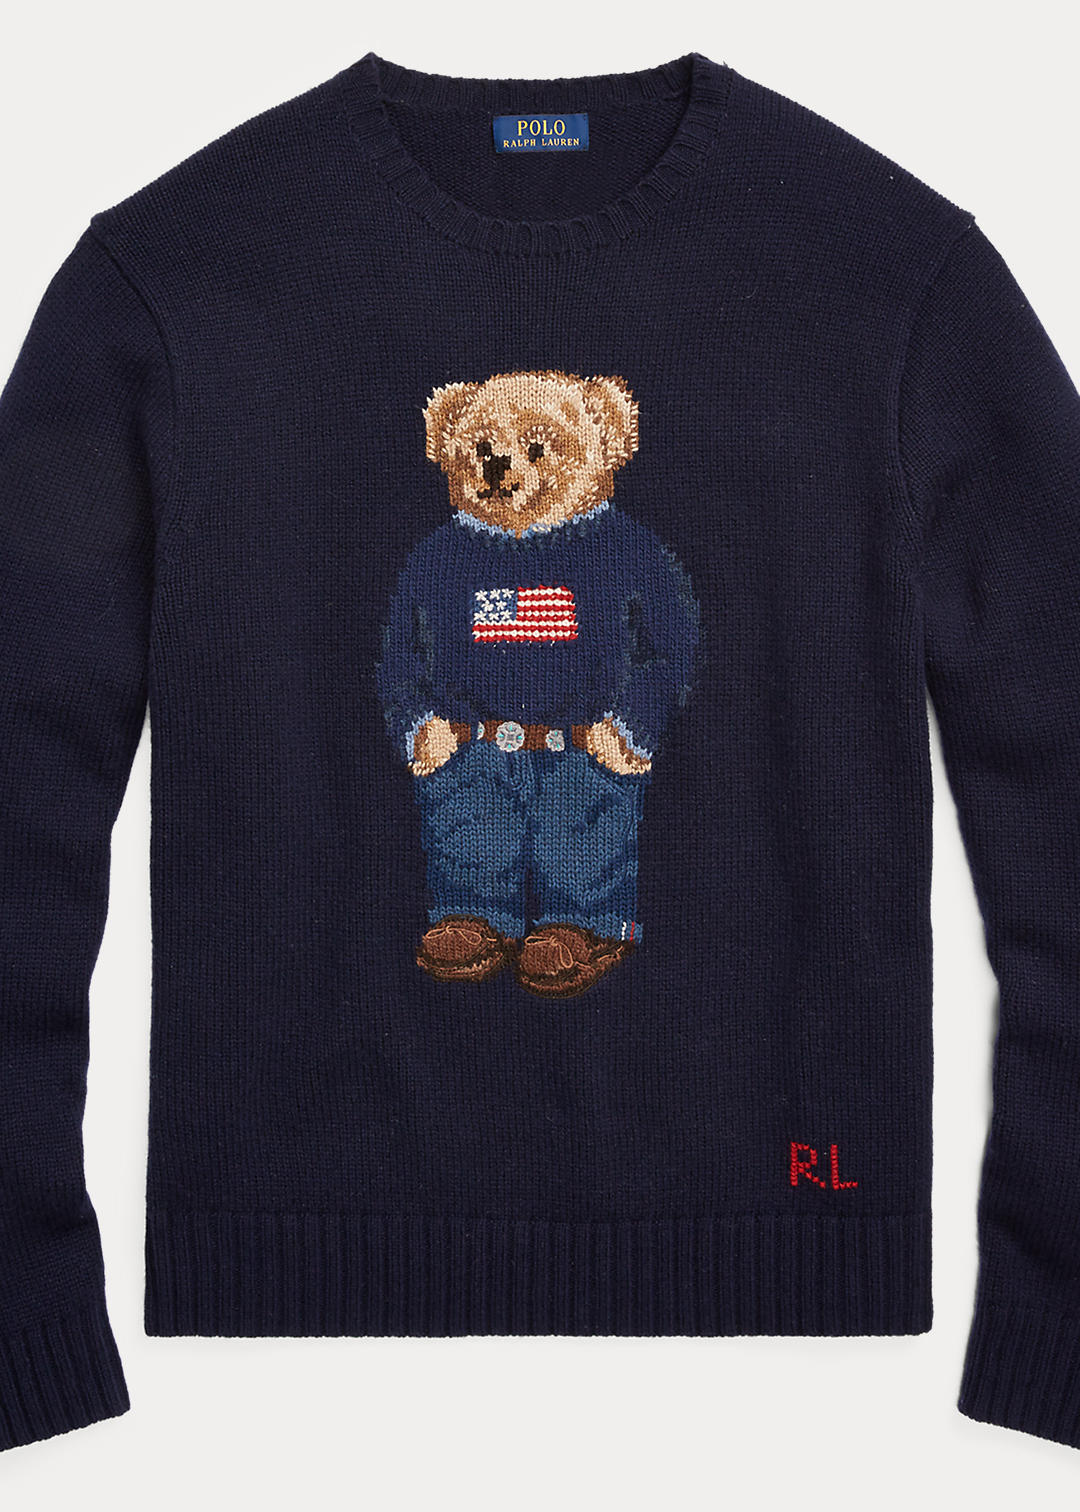 The Iconic Polo Bear Sweater